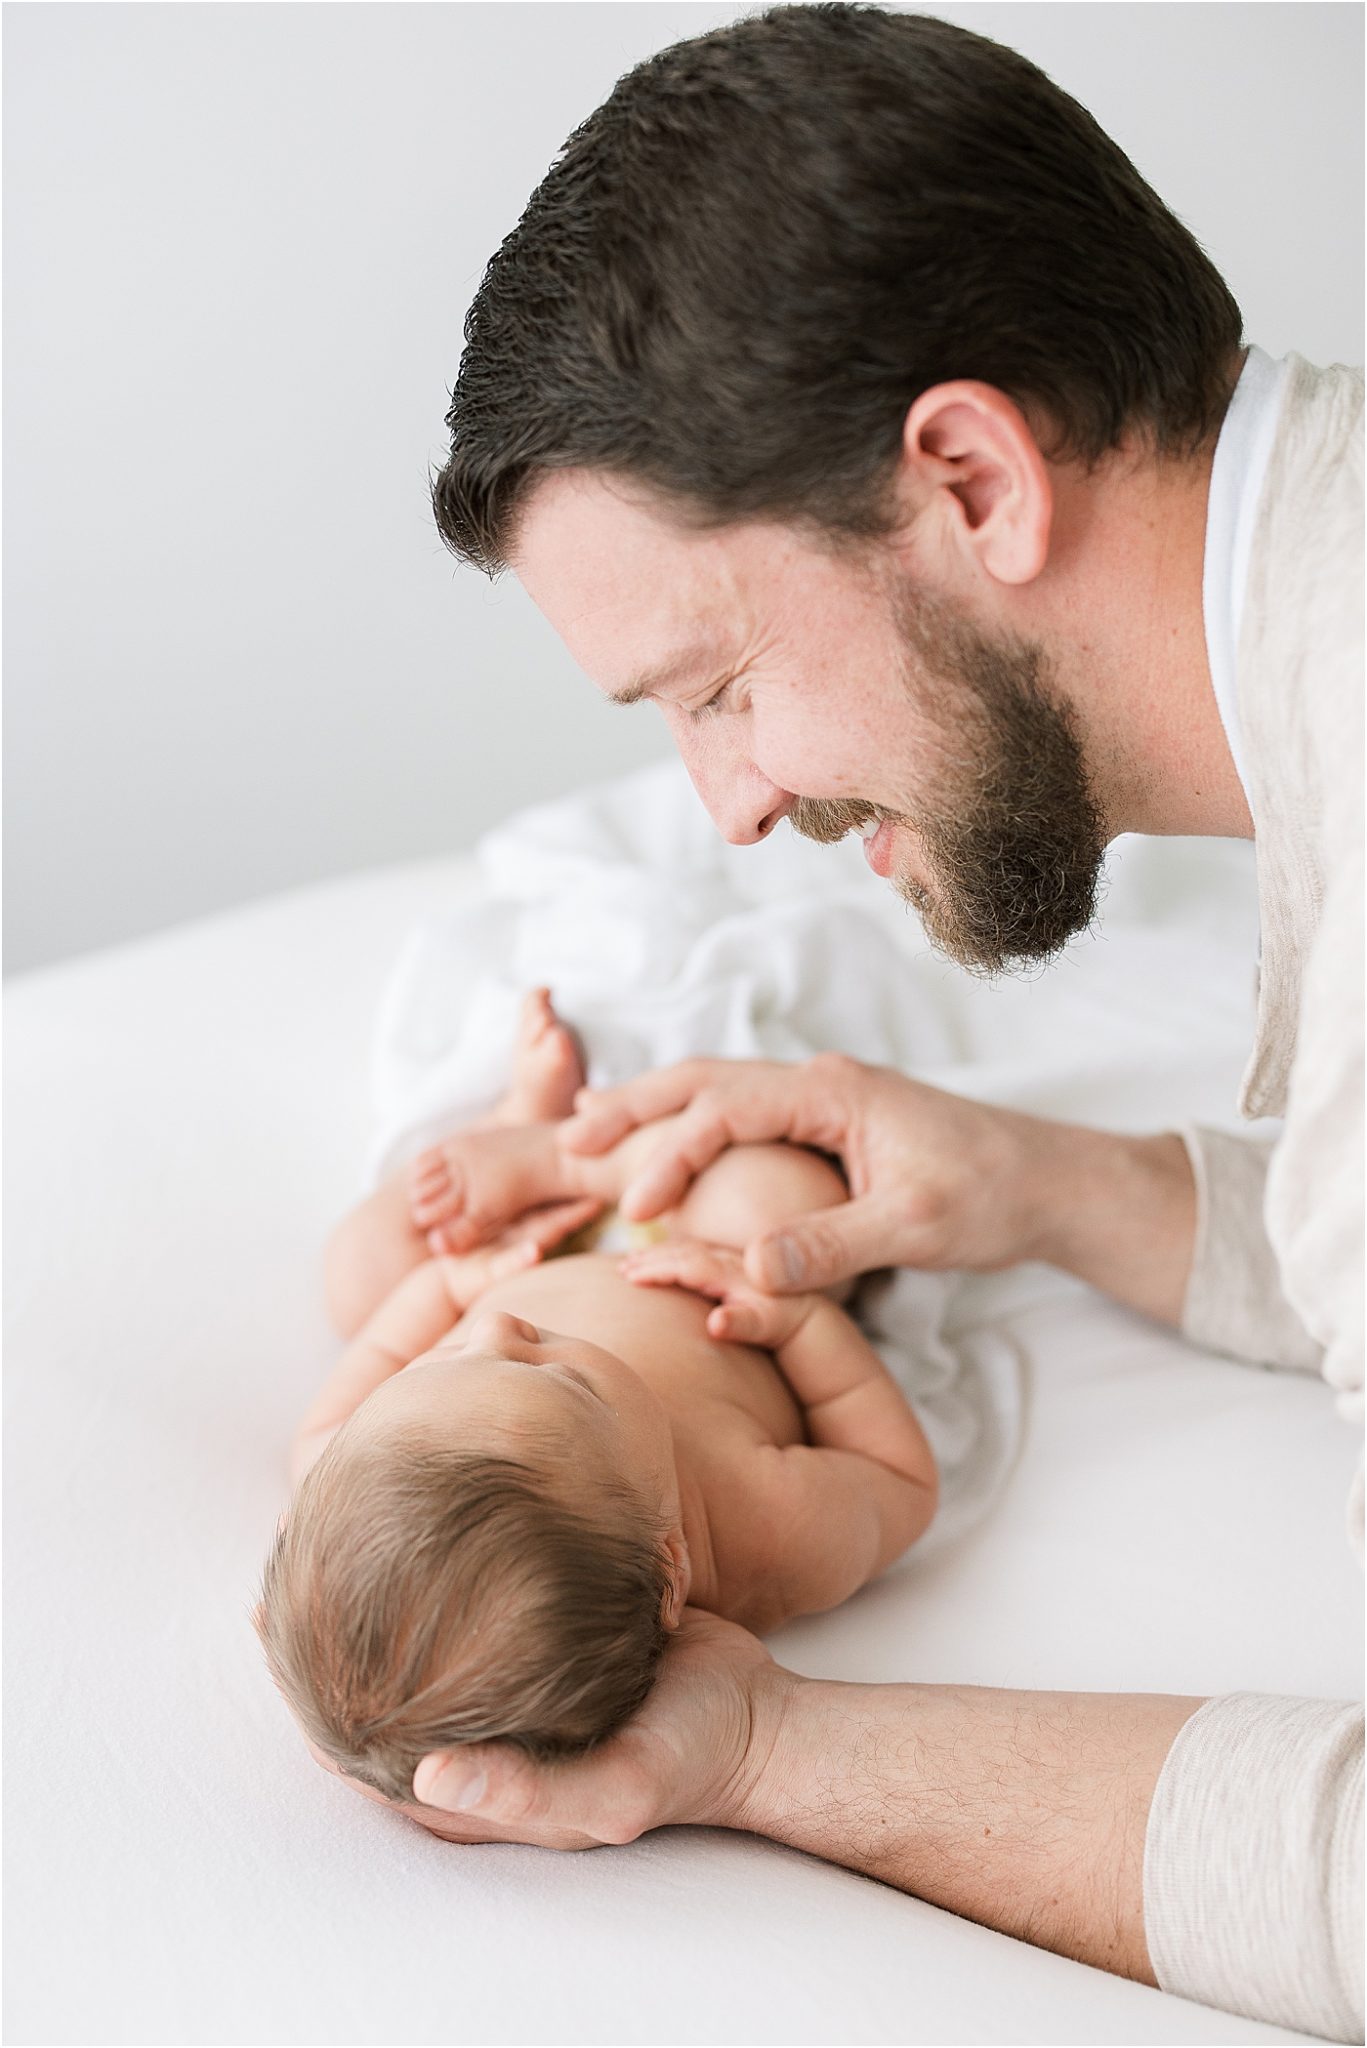 Dad looking down at his son during newborn session. Photo by Bloomington Newborn Photographer, Lindsay Konopa Photography.